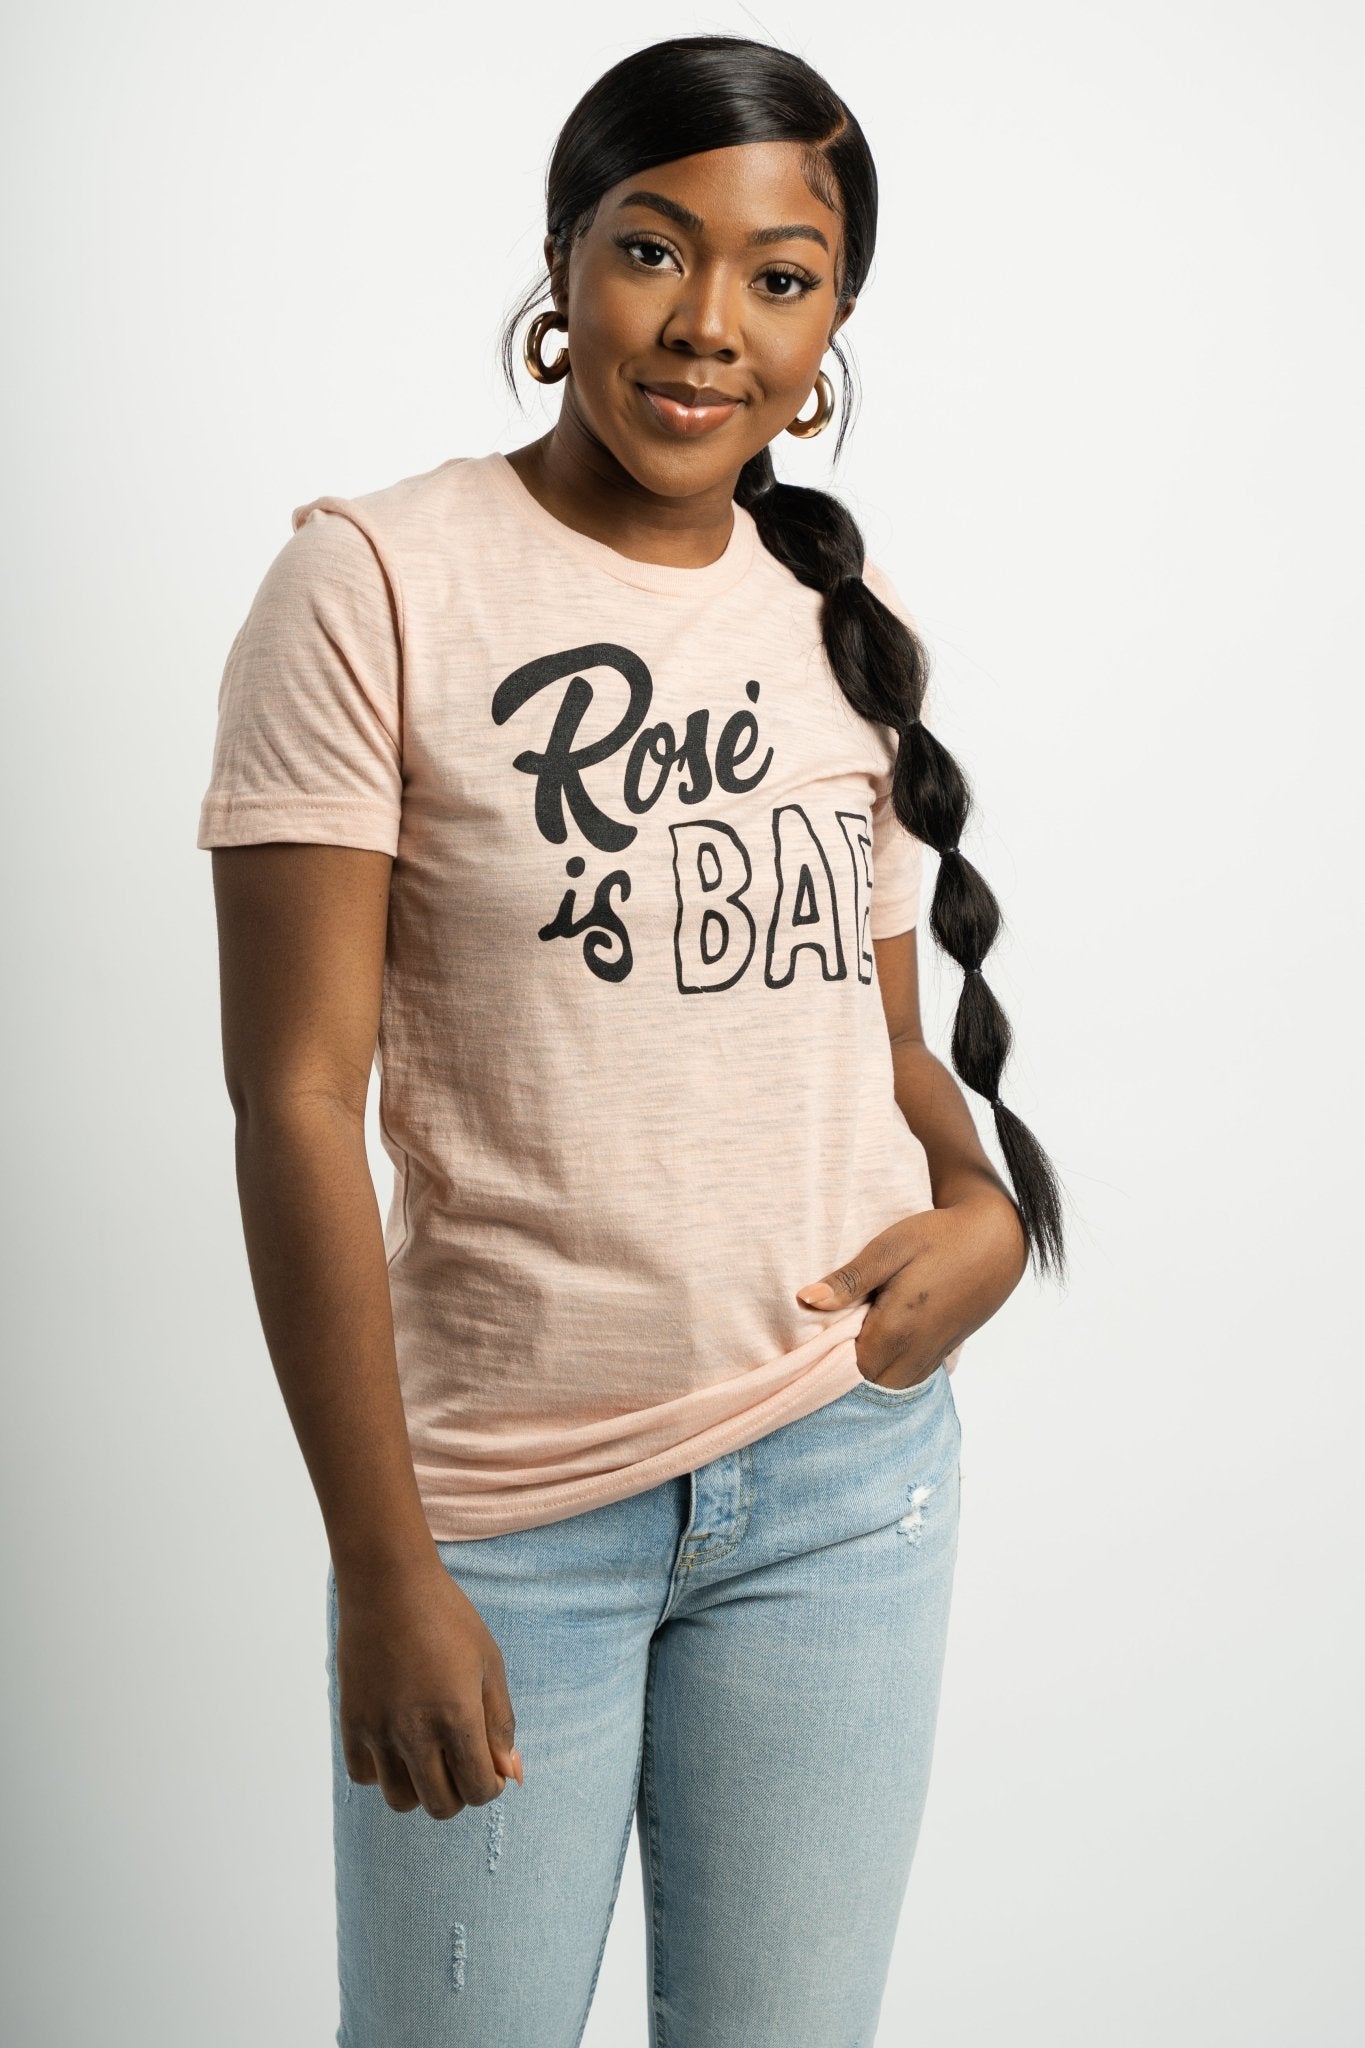 Rose is bae unisex short sleeve t-shirt peach - Stylish T-shirts - Trendy Graphic T-Shirts and Tank Tops at Lush Fashion Lounge Boutique in Oklahoma City